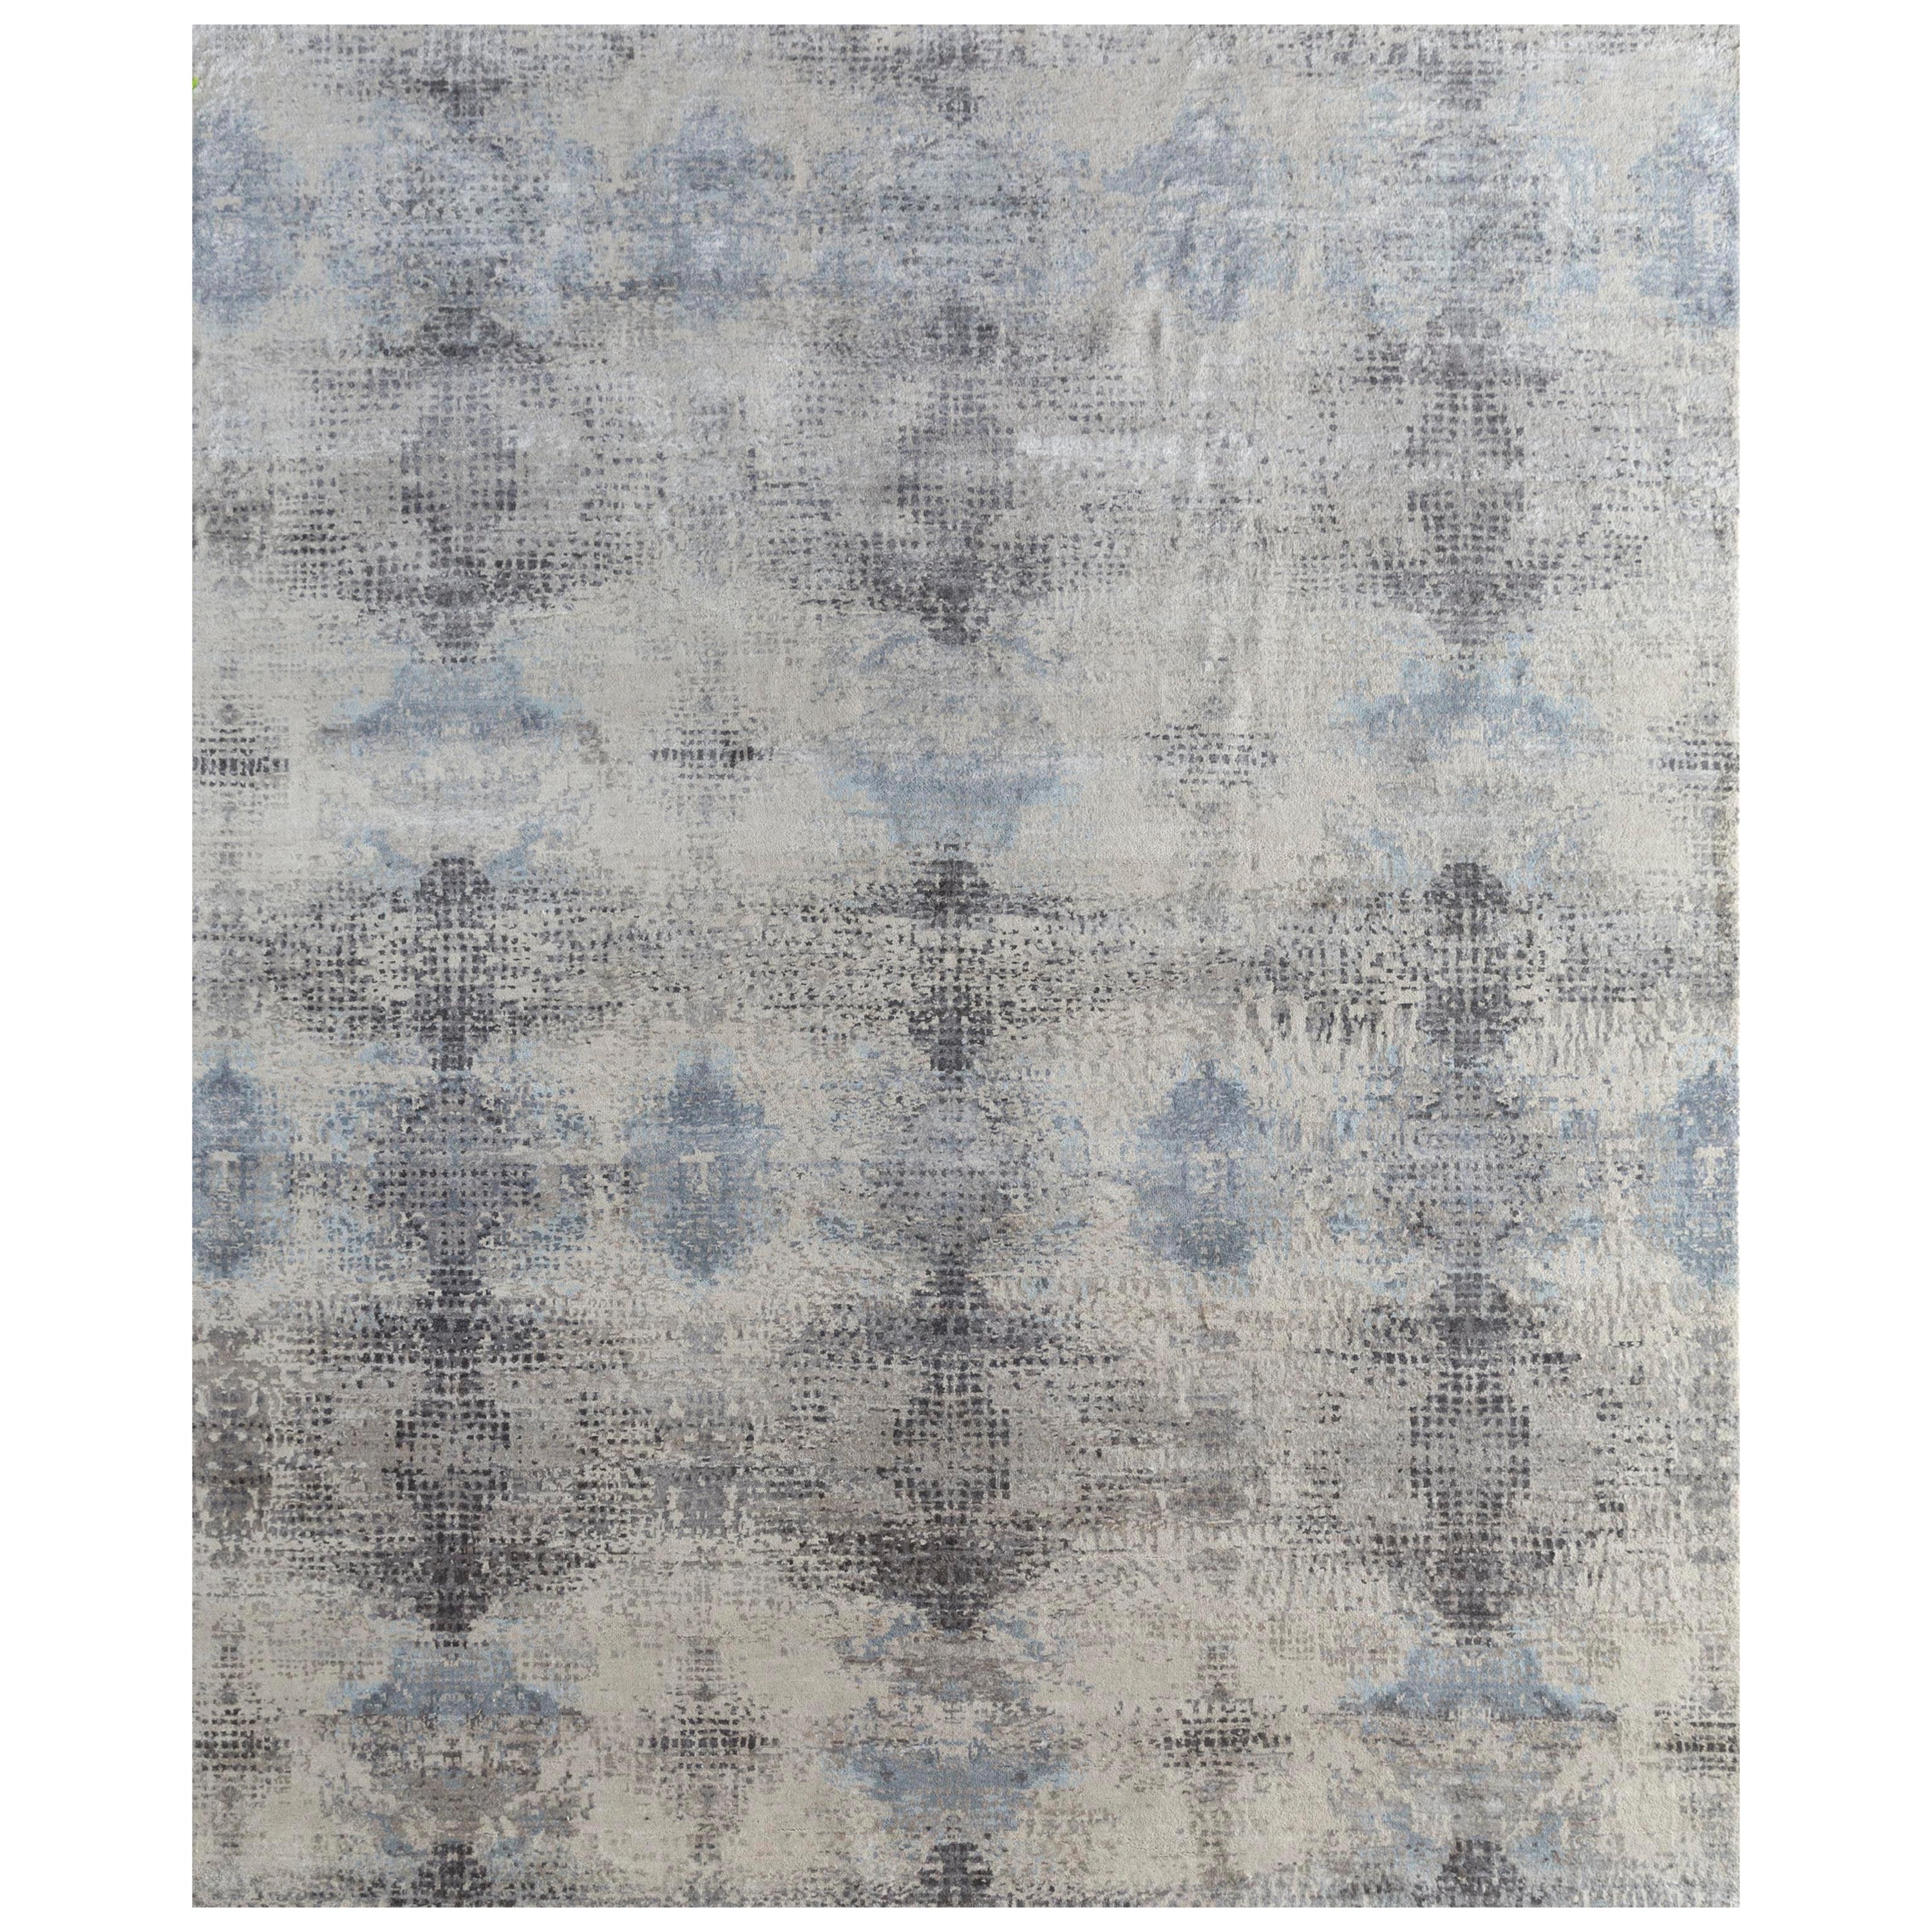 Whispers of Unseen Antique White & Pearl Blue 180X270 Cm Handknotted Rug For Sale